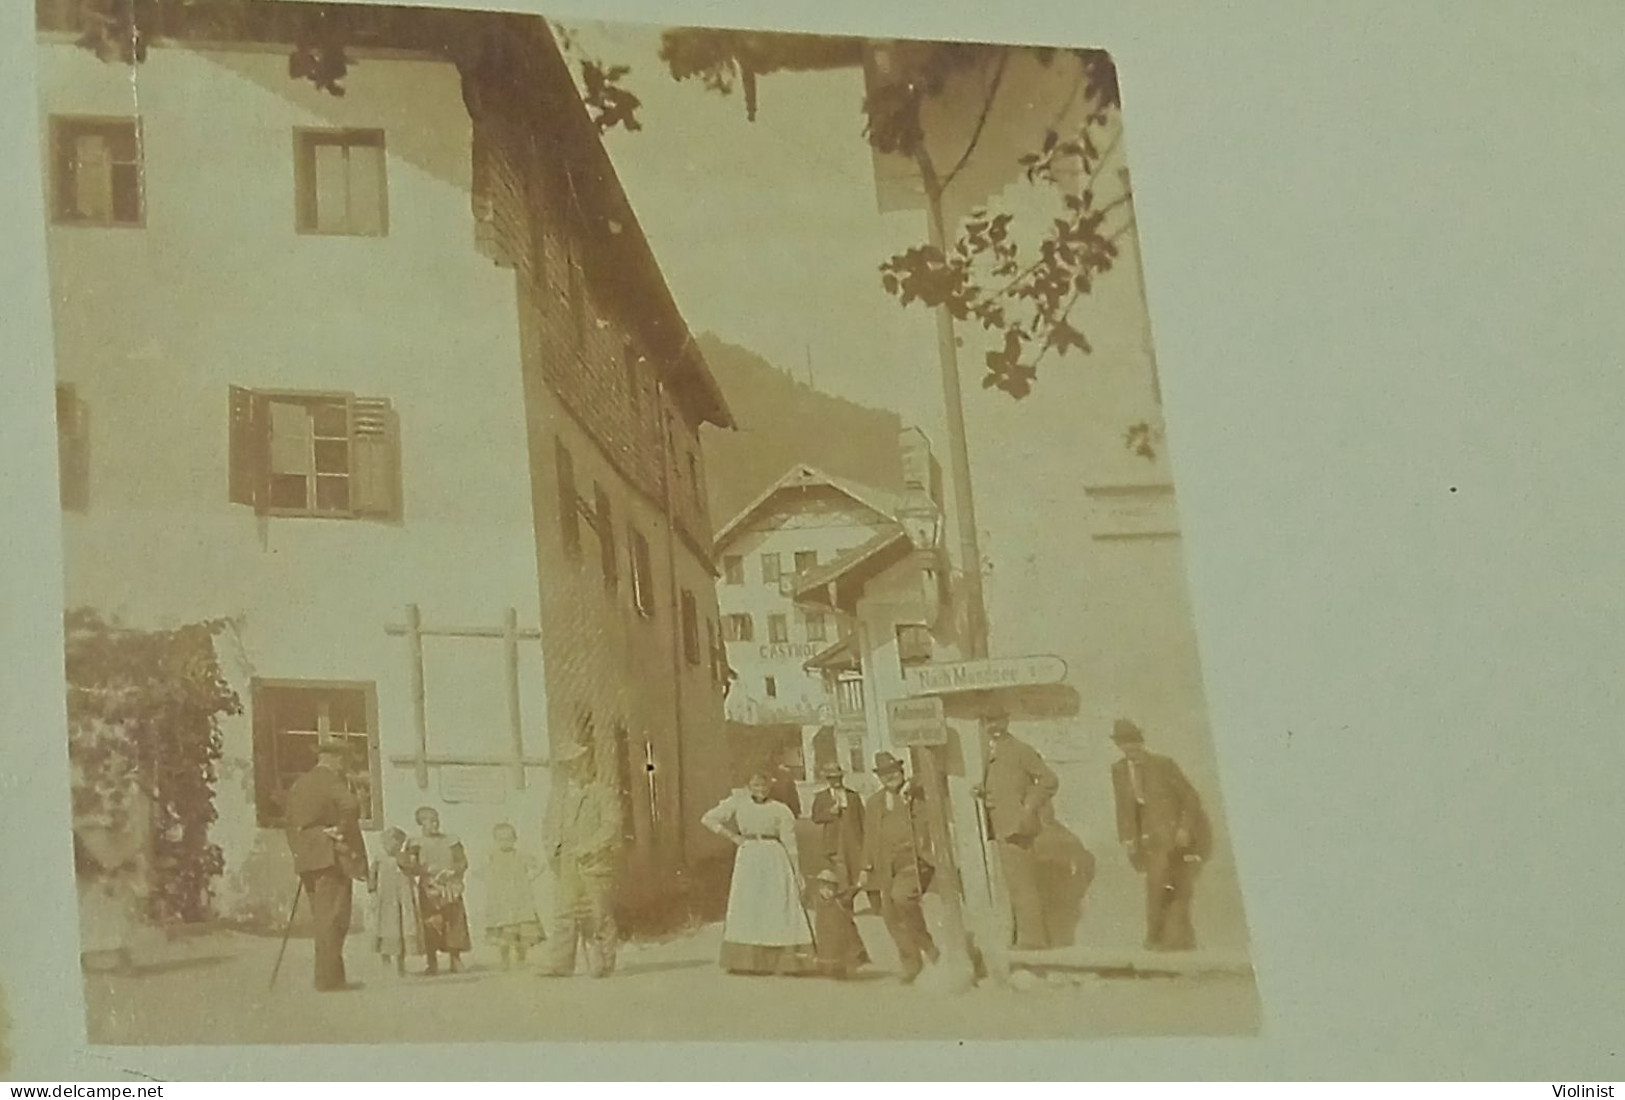 Austria-Children And People On The Street At The Nach Mandsee Signpost-old Photo St.Gilgen - St. Gilgen